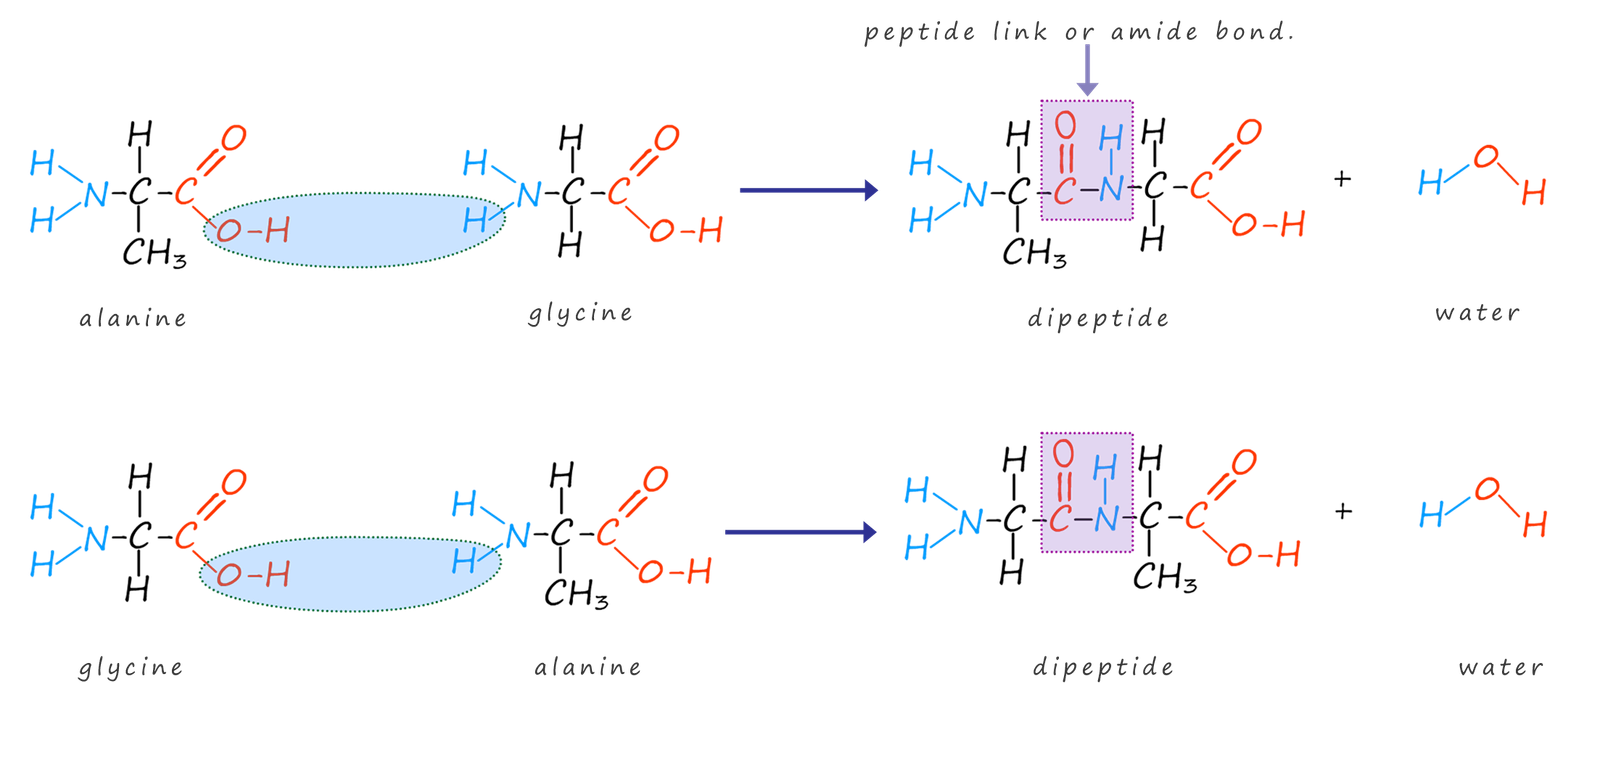 alanine and glycine forming qa dipeptide